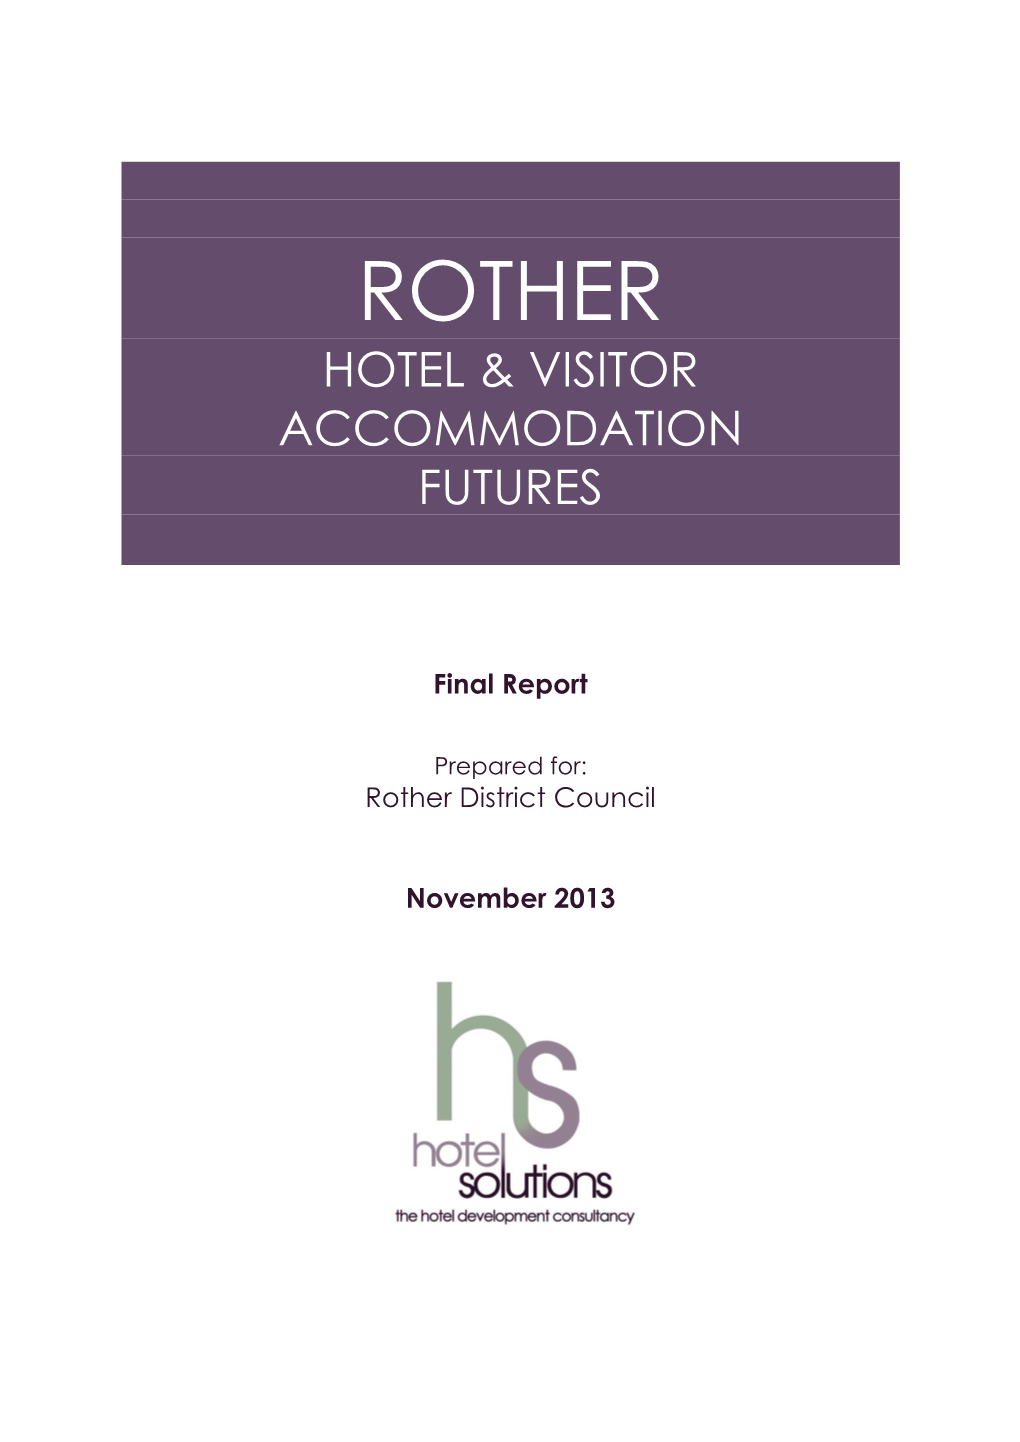 Hotel & Visitor Accommodation Futures